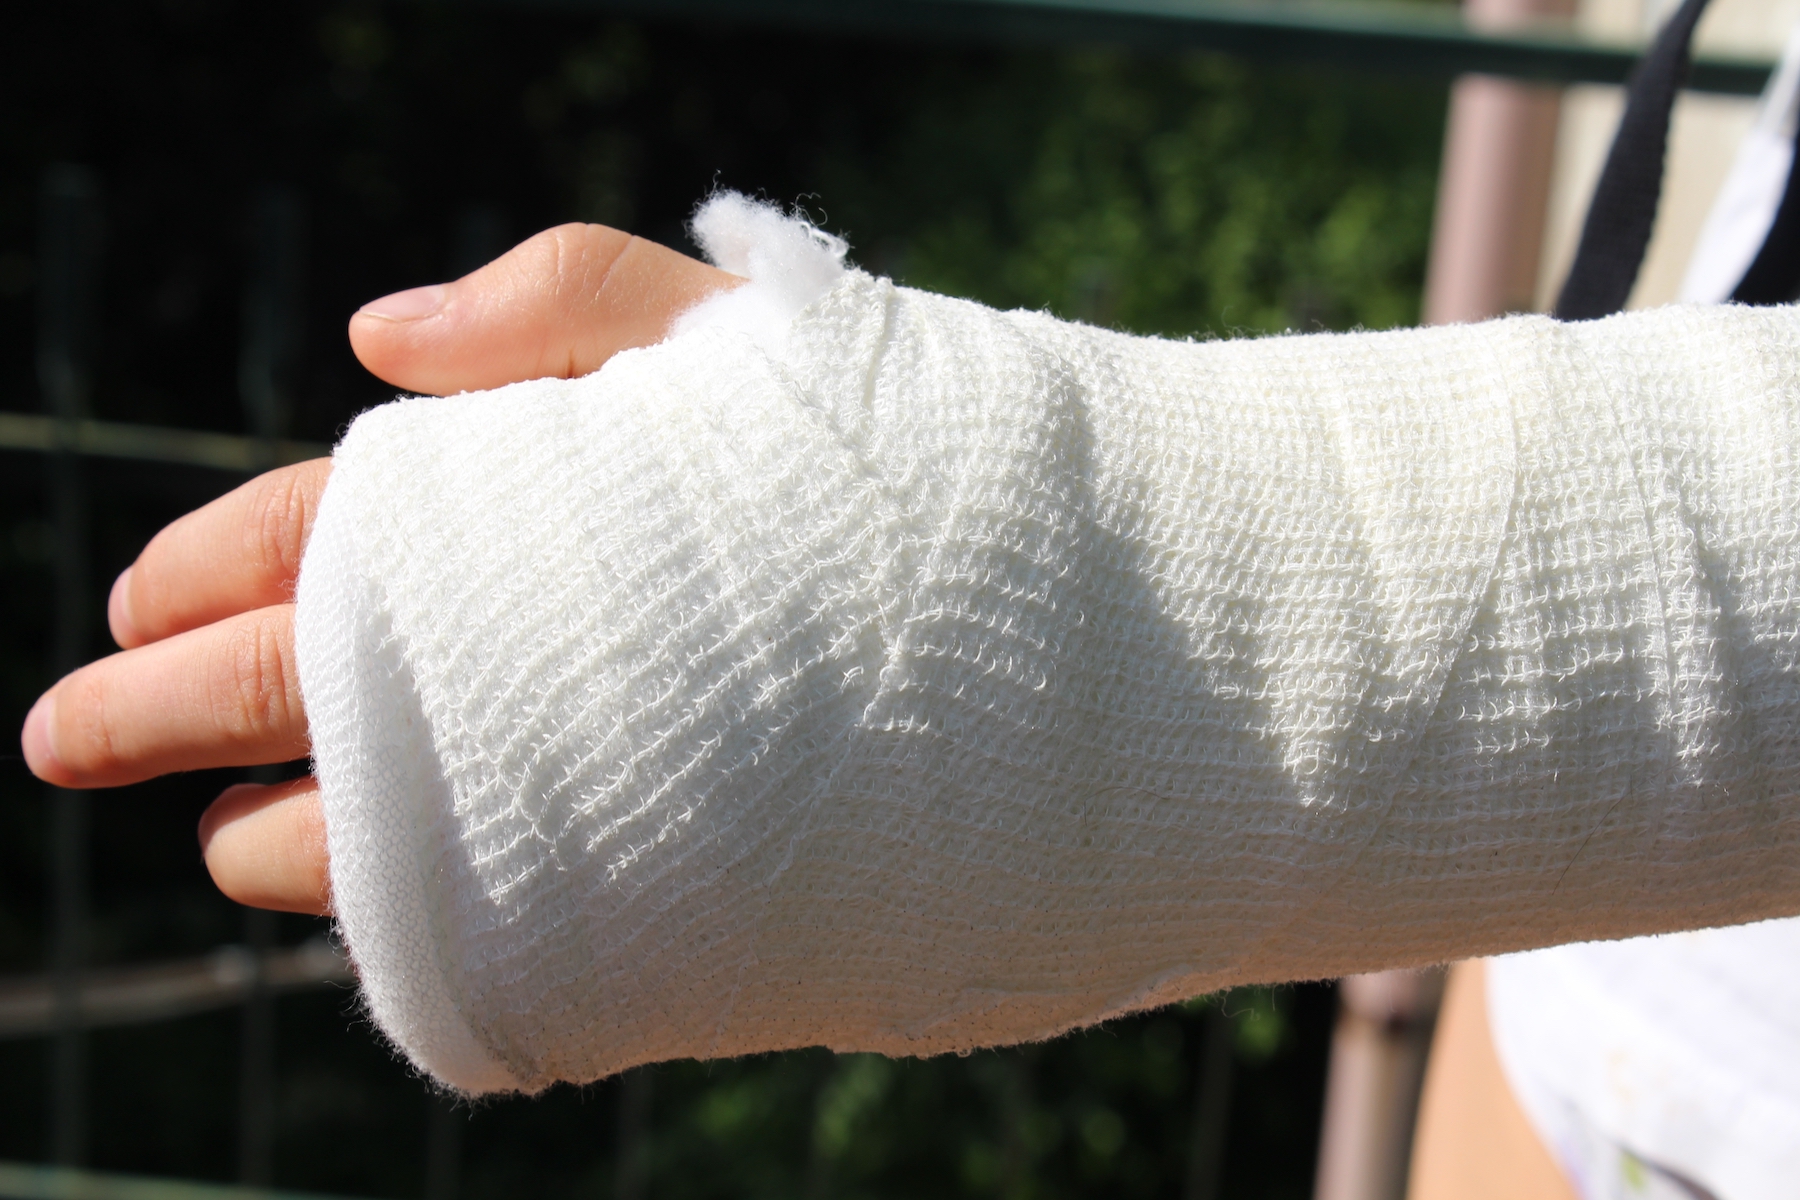 Baton rouge injury lawyers can help with claims for broken bones